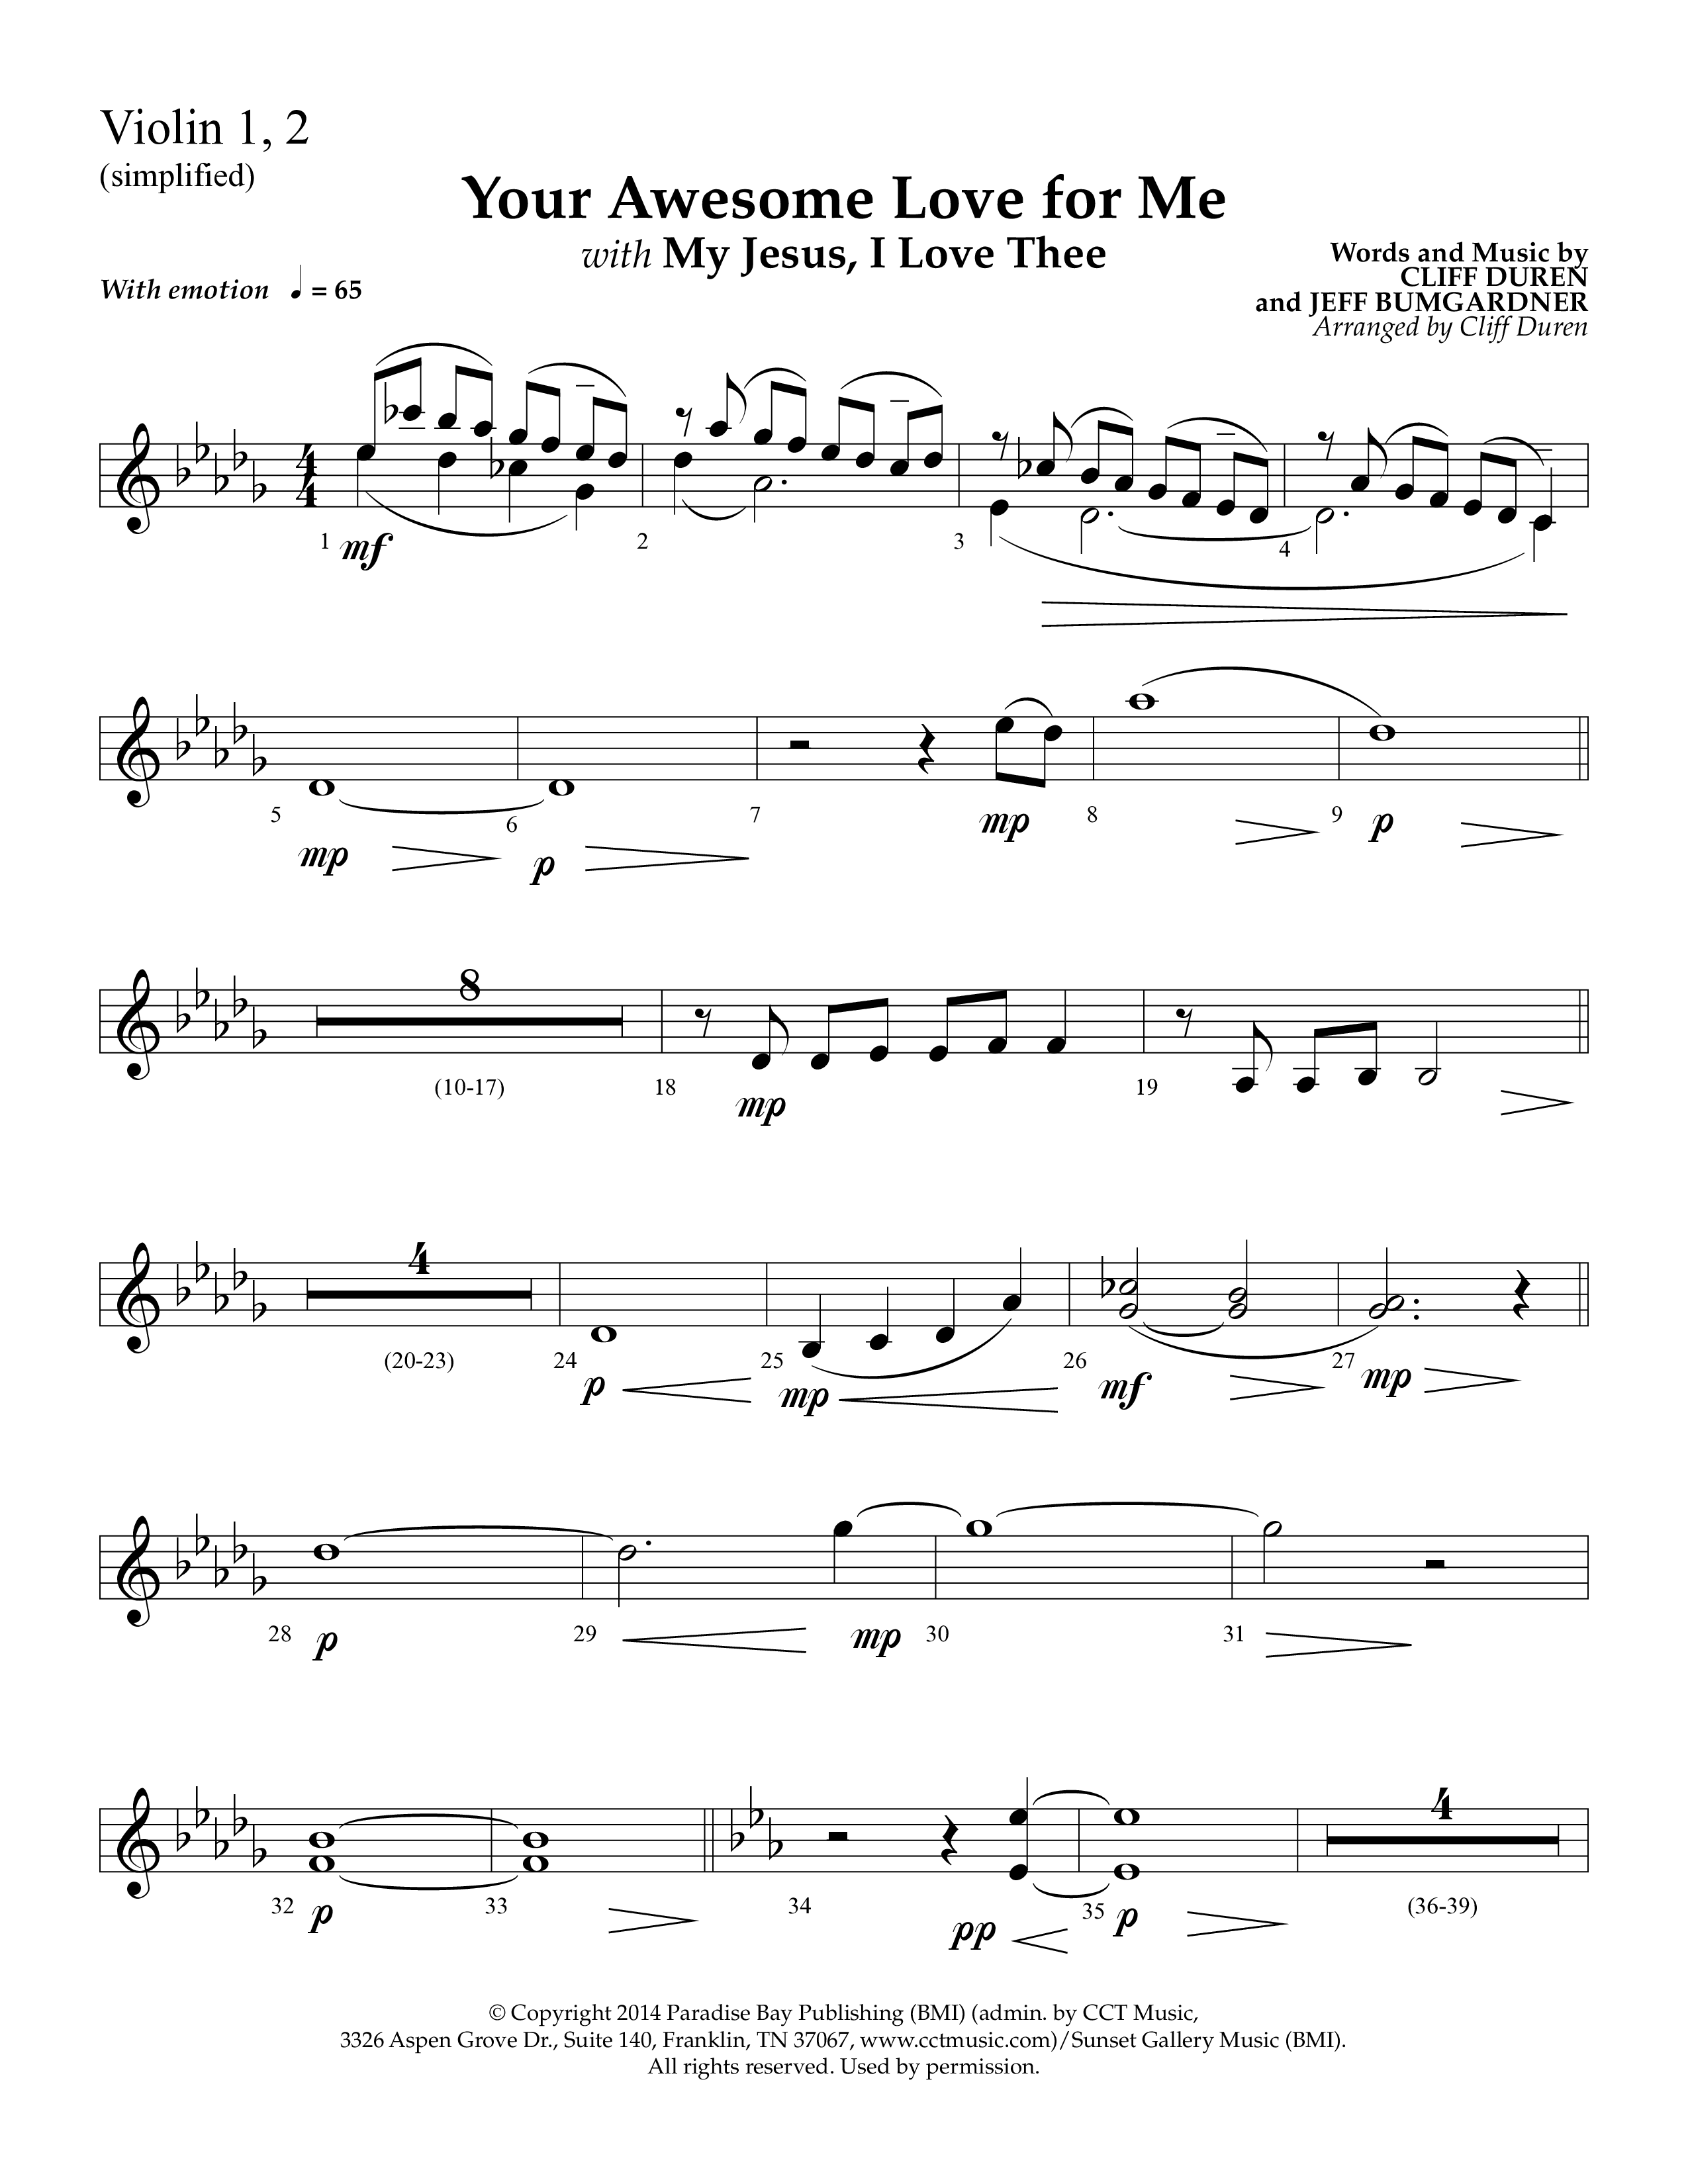 Your Awesome Love For Me (with My Jesus I Love Thee) (Choral Anthem SATB) Violin 1/2 (Lifeway Choral / Arr. Cliff Duren)